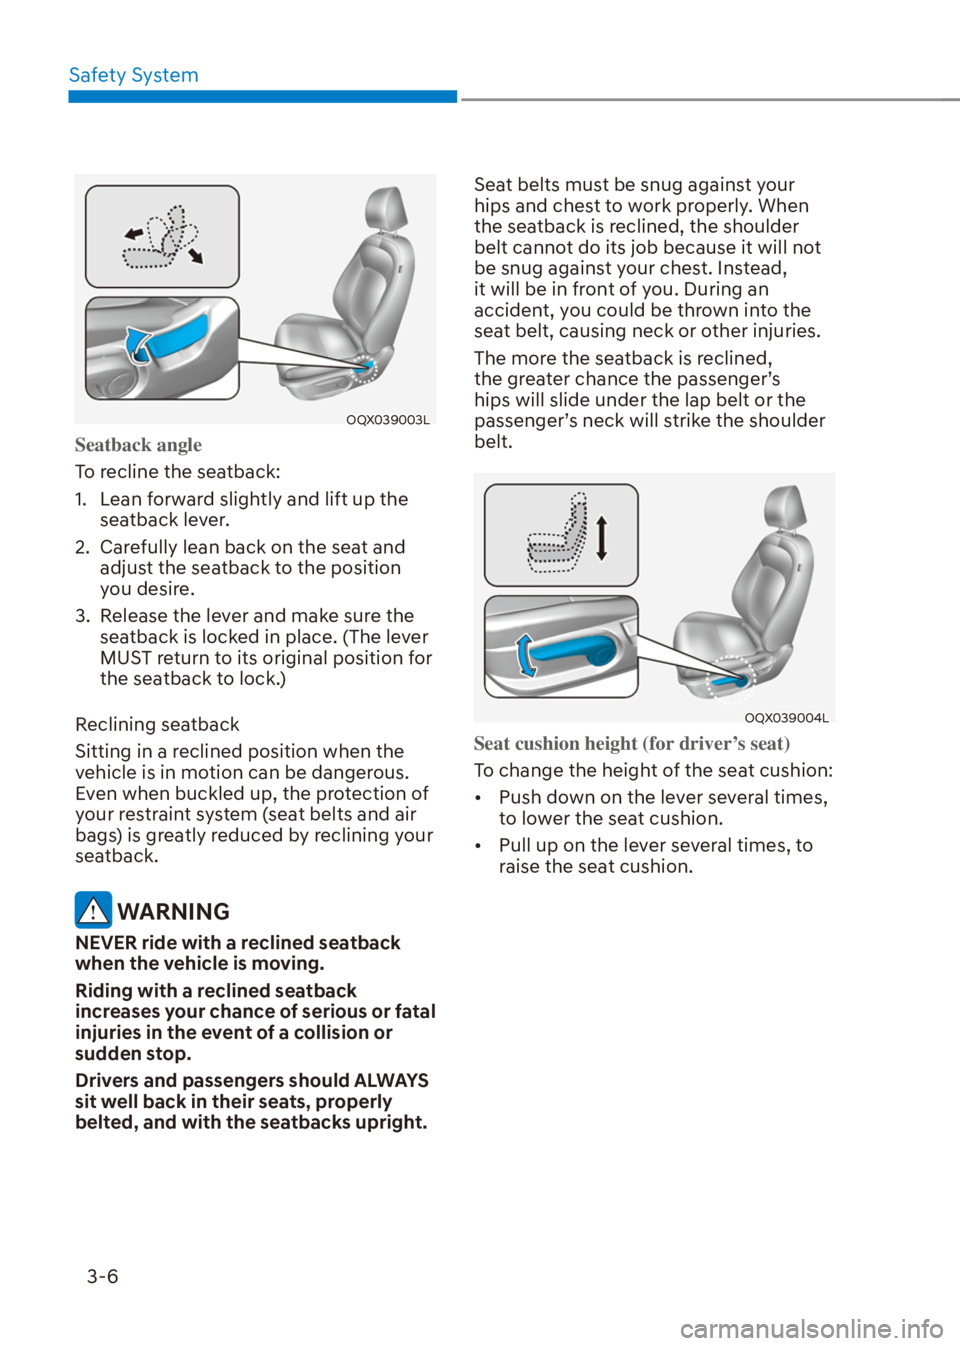 HYUNDAI VENUE 2021 Owners Guide Safety System
3-6
OQX039003L
Seatback angle
To recline the seatback:
1.  Lean forward slightly and lift up the 
seatback lever.
2.  Carefully lean back on the seat and 
adjust the seatback to the posi